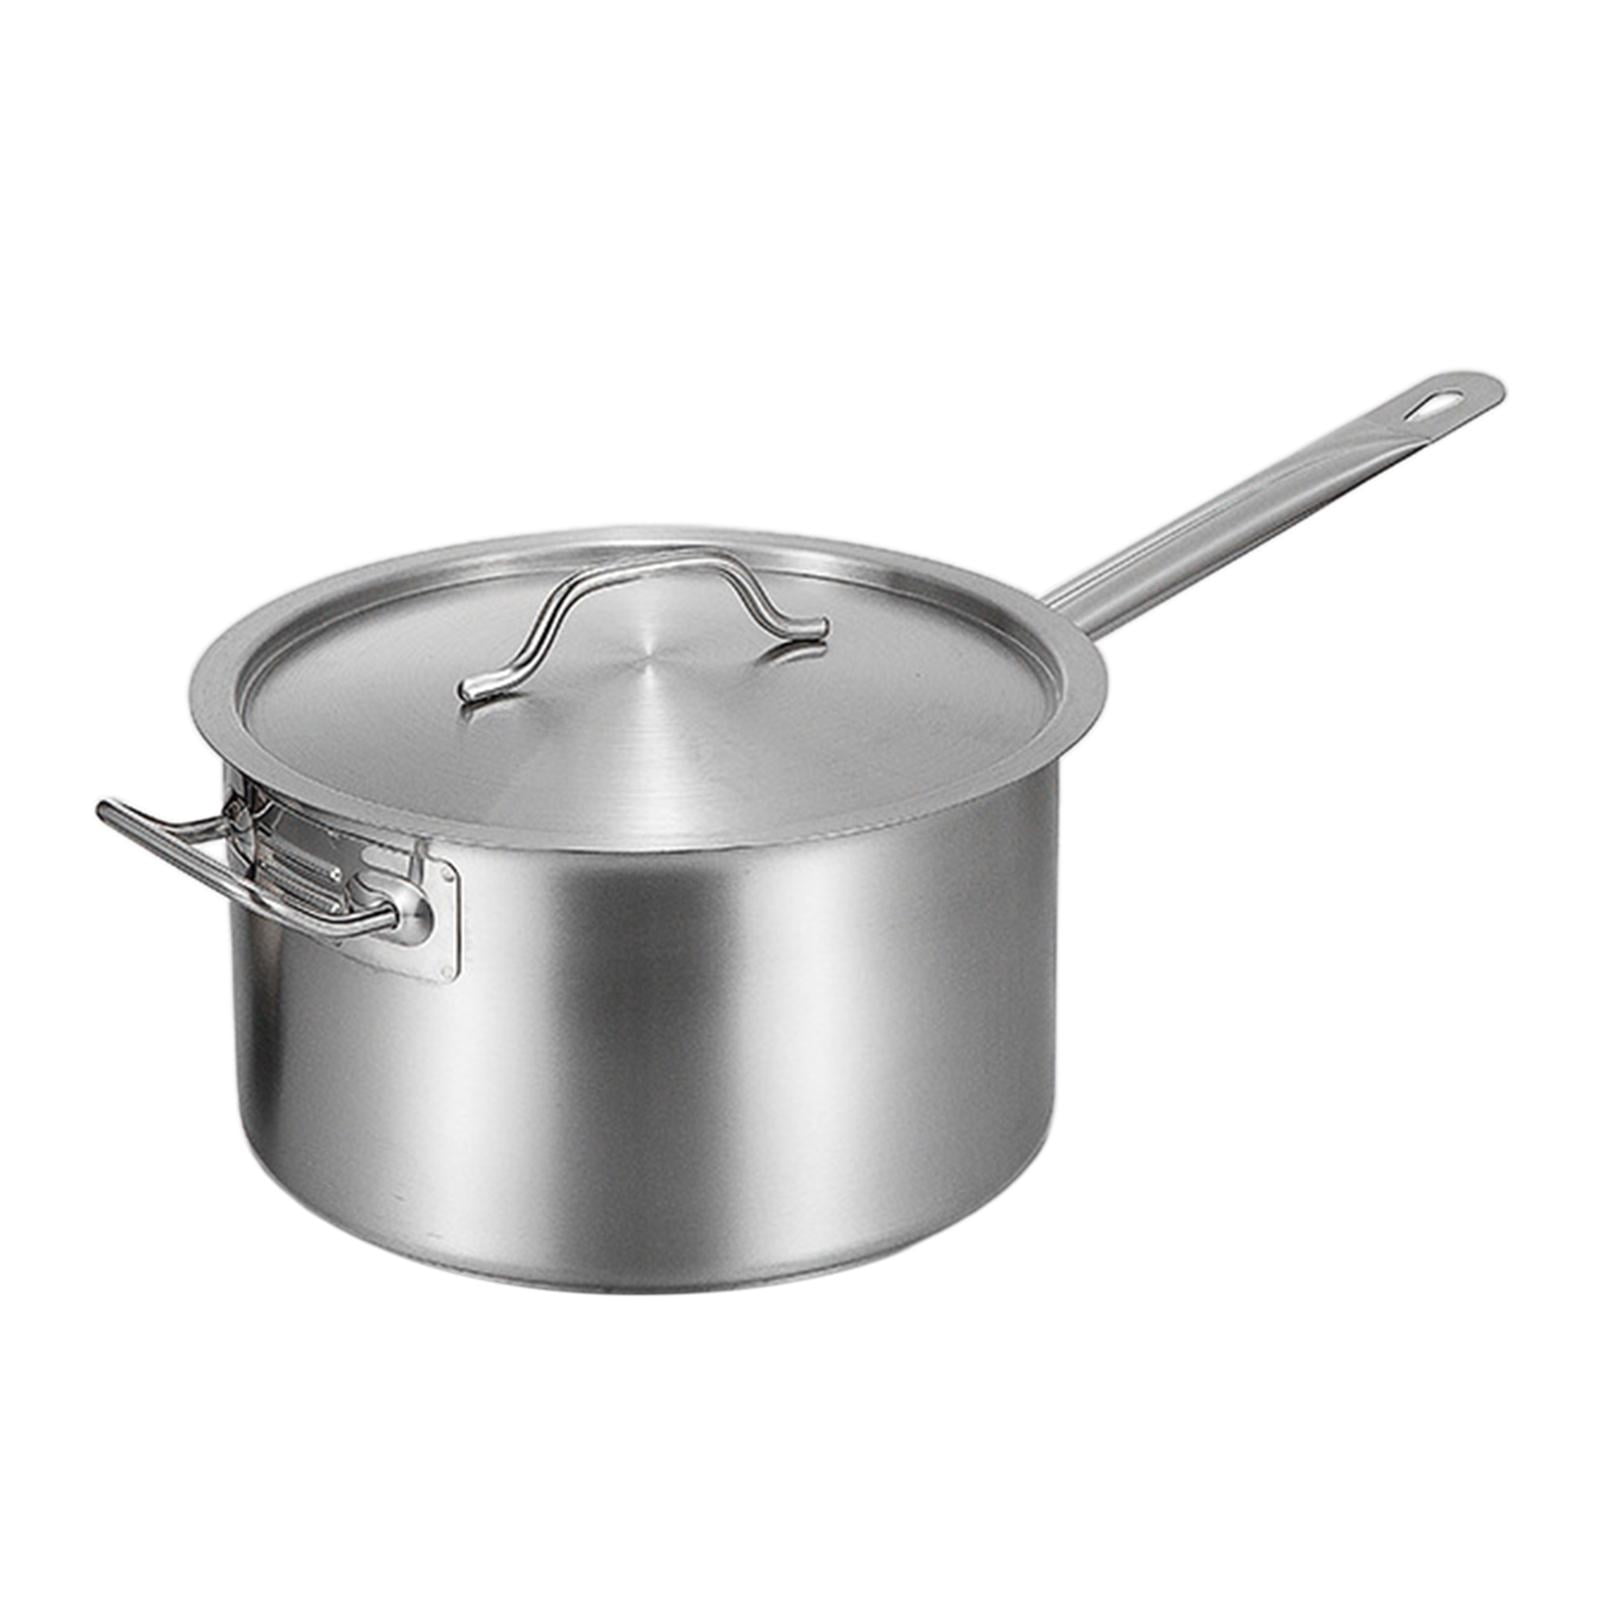 Twowood Stainless Steel Saucepan Milk Noodle Pan Pot with Glass Lid Kitchen  Cooking Tool